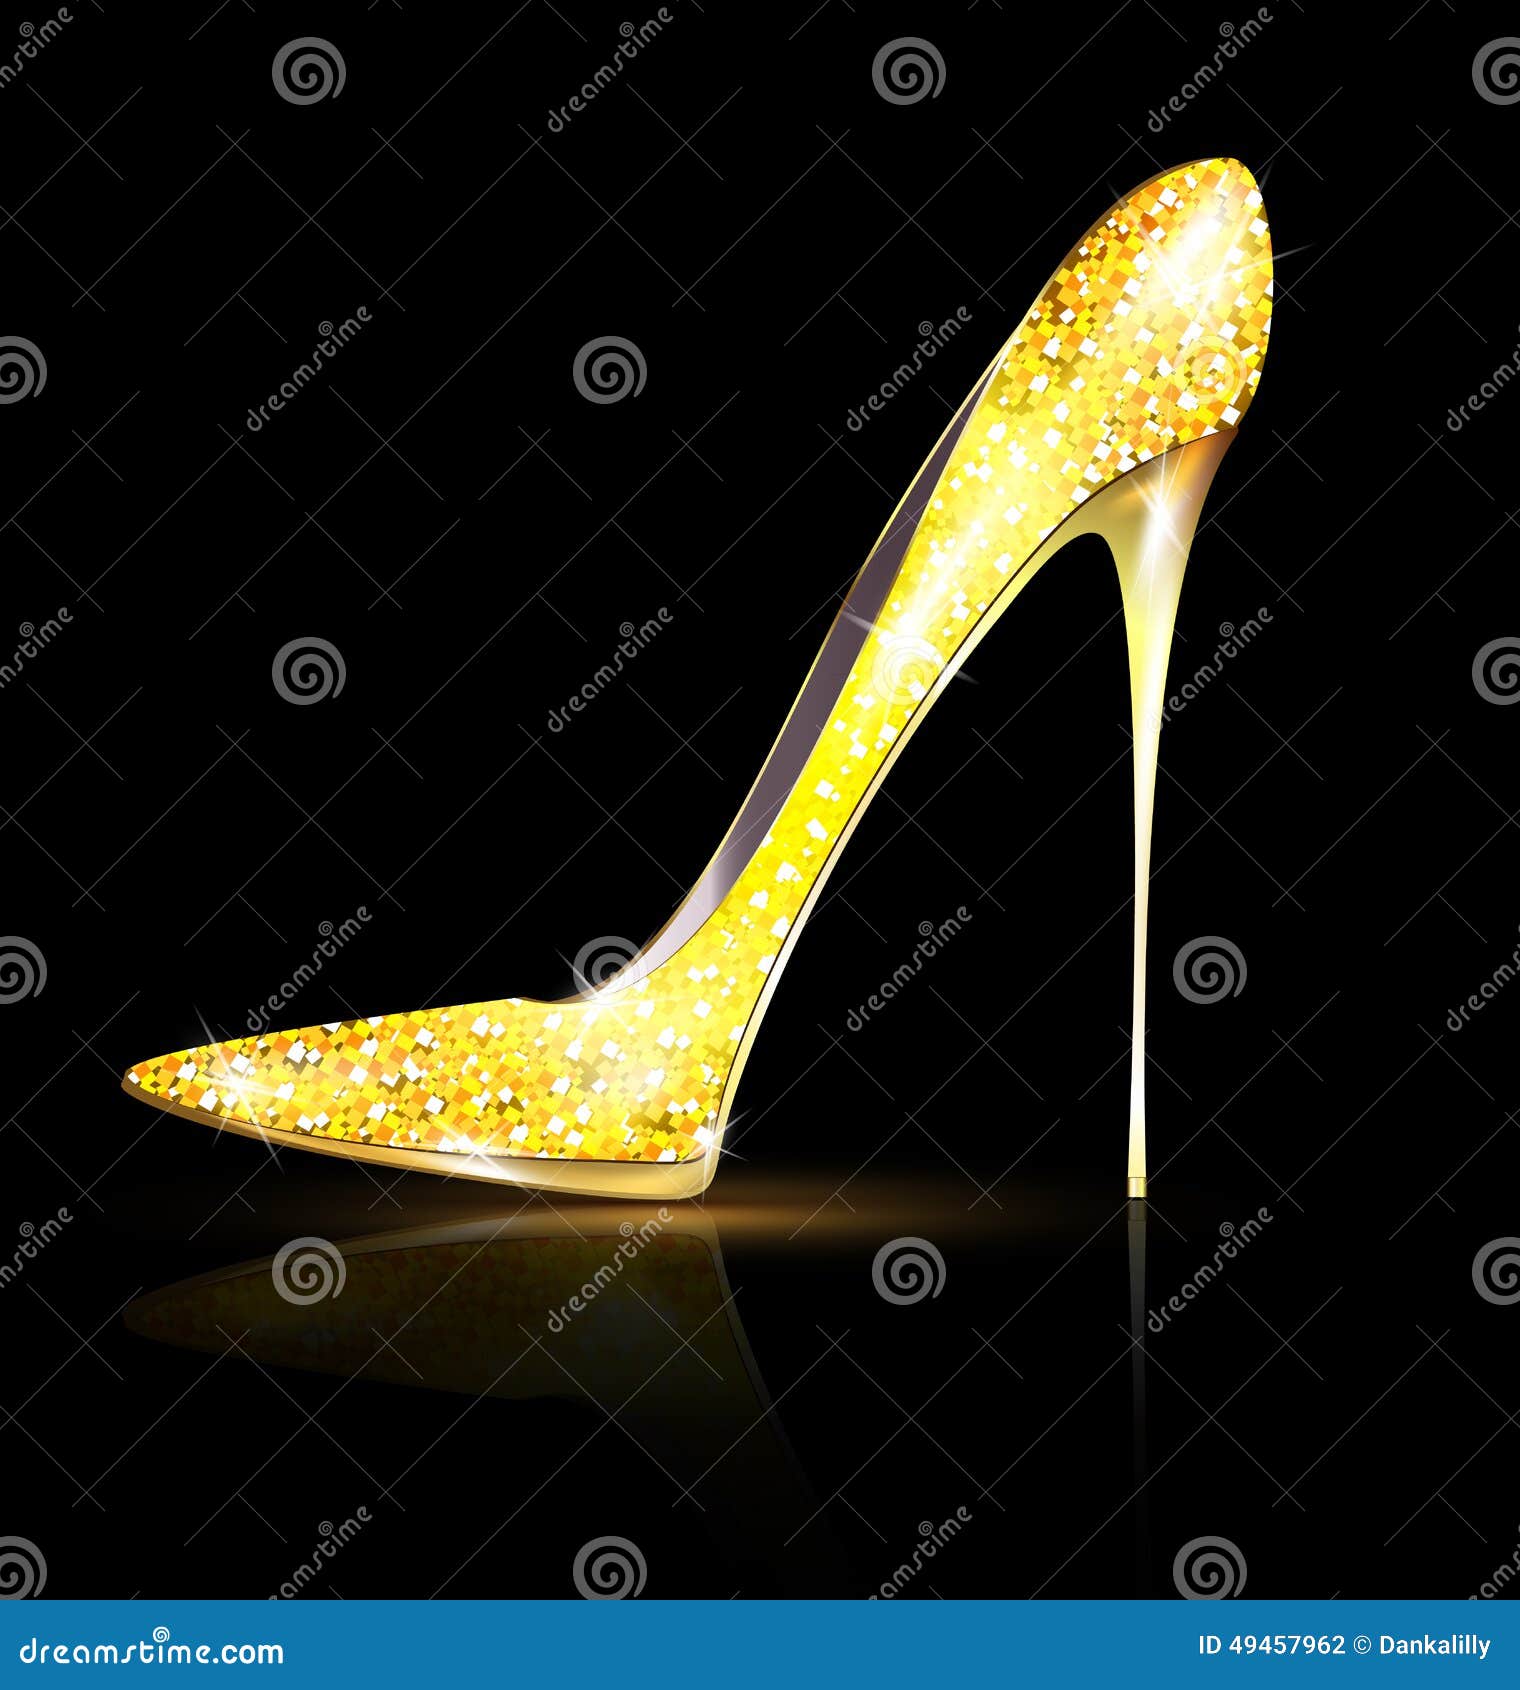 Gold High Heels PNG Transparent, Gold High Heels, High Heel Clipart,  Golden, High Heeled Shoes PNG Image For Free Download